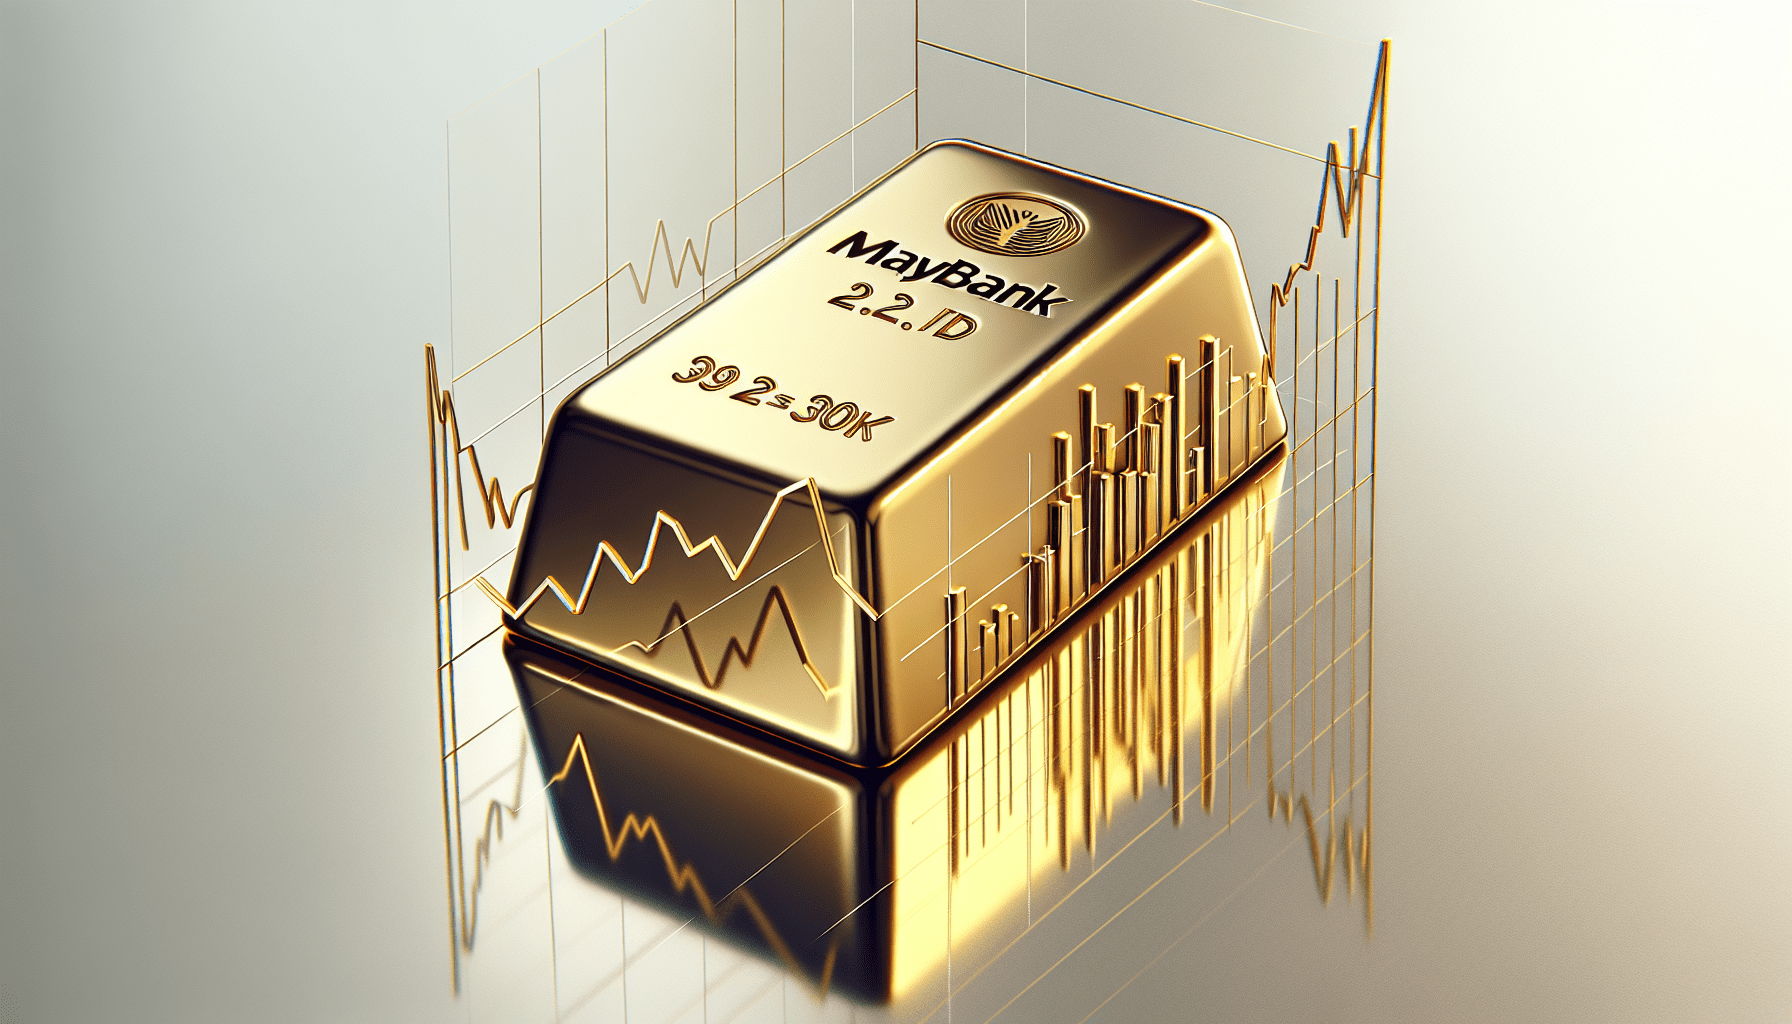 What Is The Price History Of Gold For Maybank?